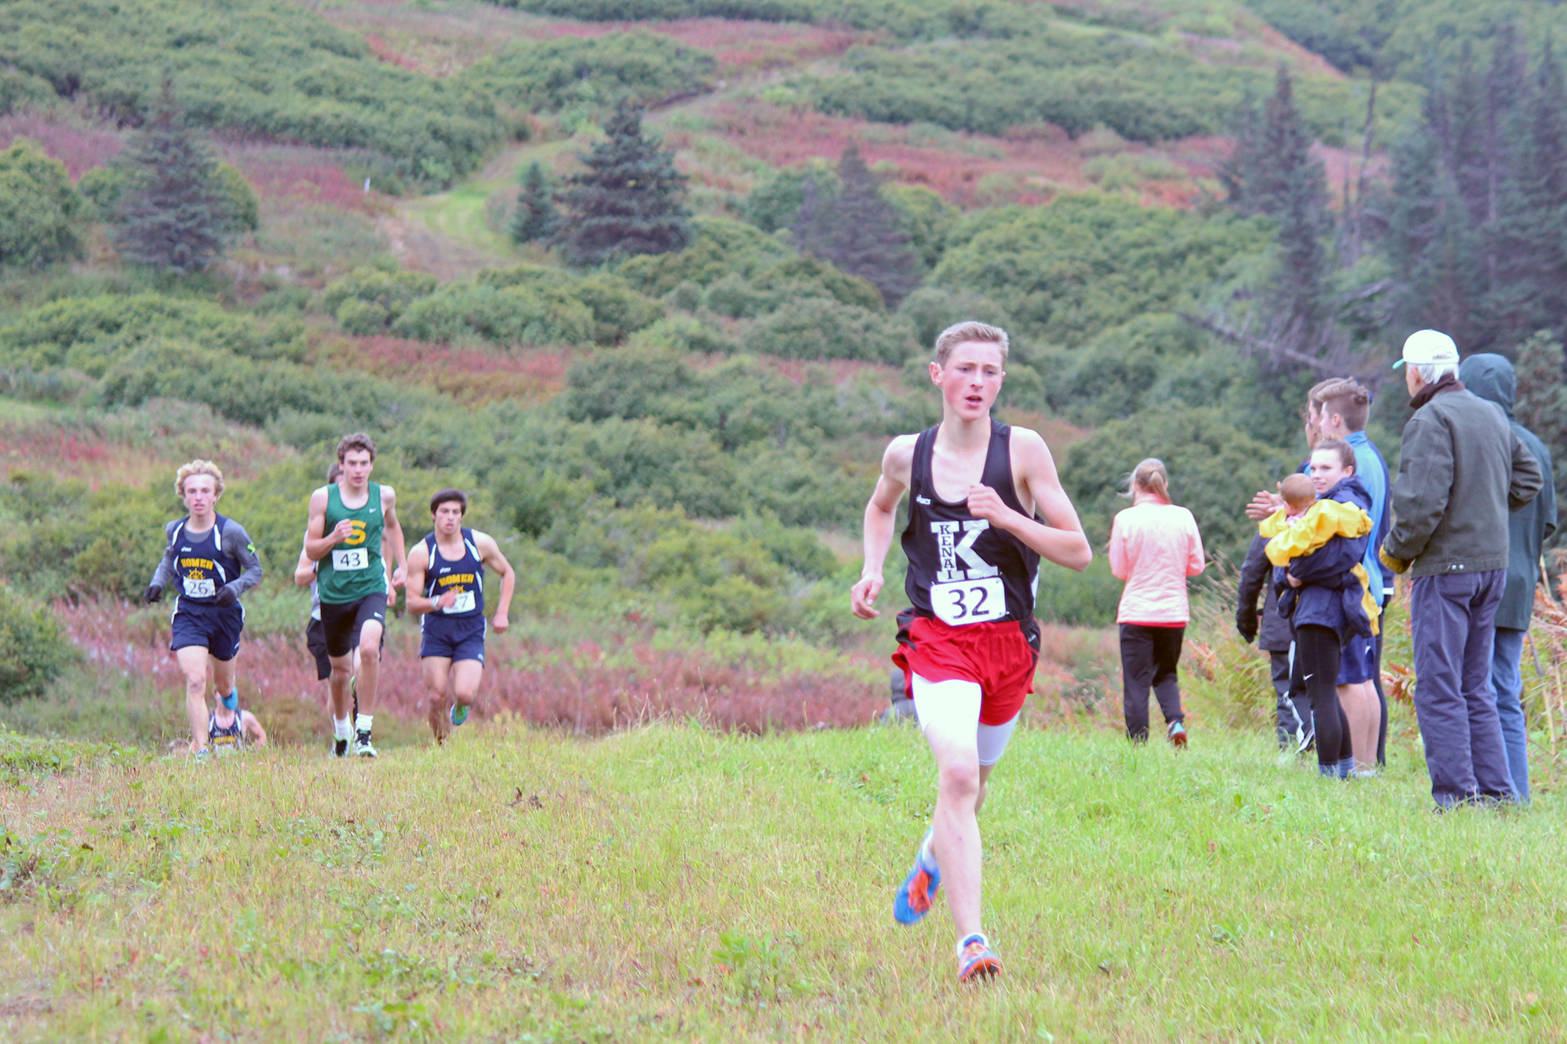 Kenai Central High School runner Maison Dunham pulls ahead of the pack nearing the end of the varisy boys race at the Kenai Peninsula Borough Cross-Country Running Championships on Tuesday, Sept. 12, 2017 at the Lookout Mountain Trails near Homer, Alaska. Soldotna High School took first overall out of the varsity boys teams, and the Kenai team claimed the top spot for the girls. (Photo by Megan Pacer/Homer News)